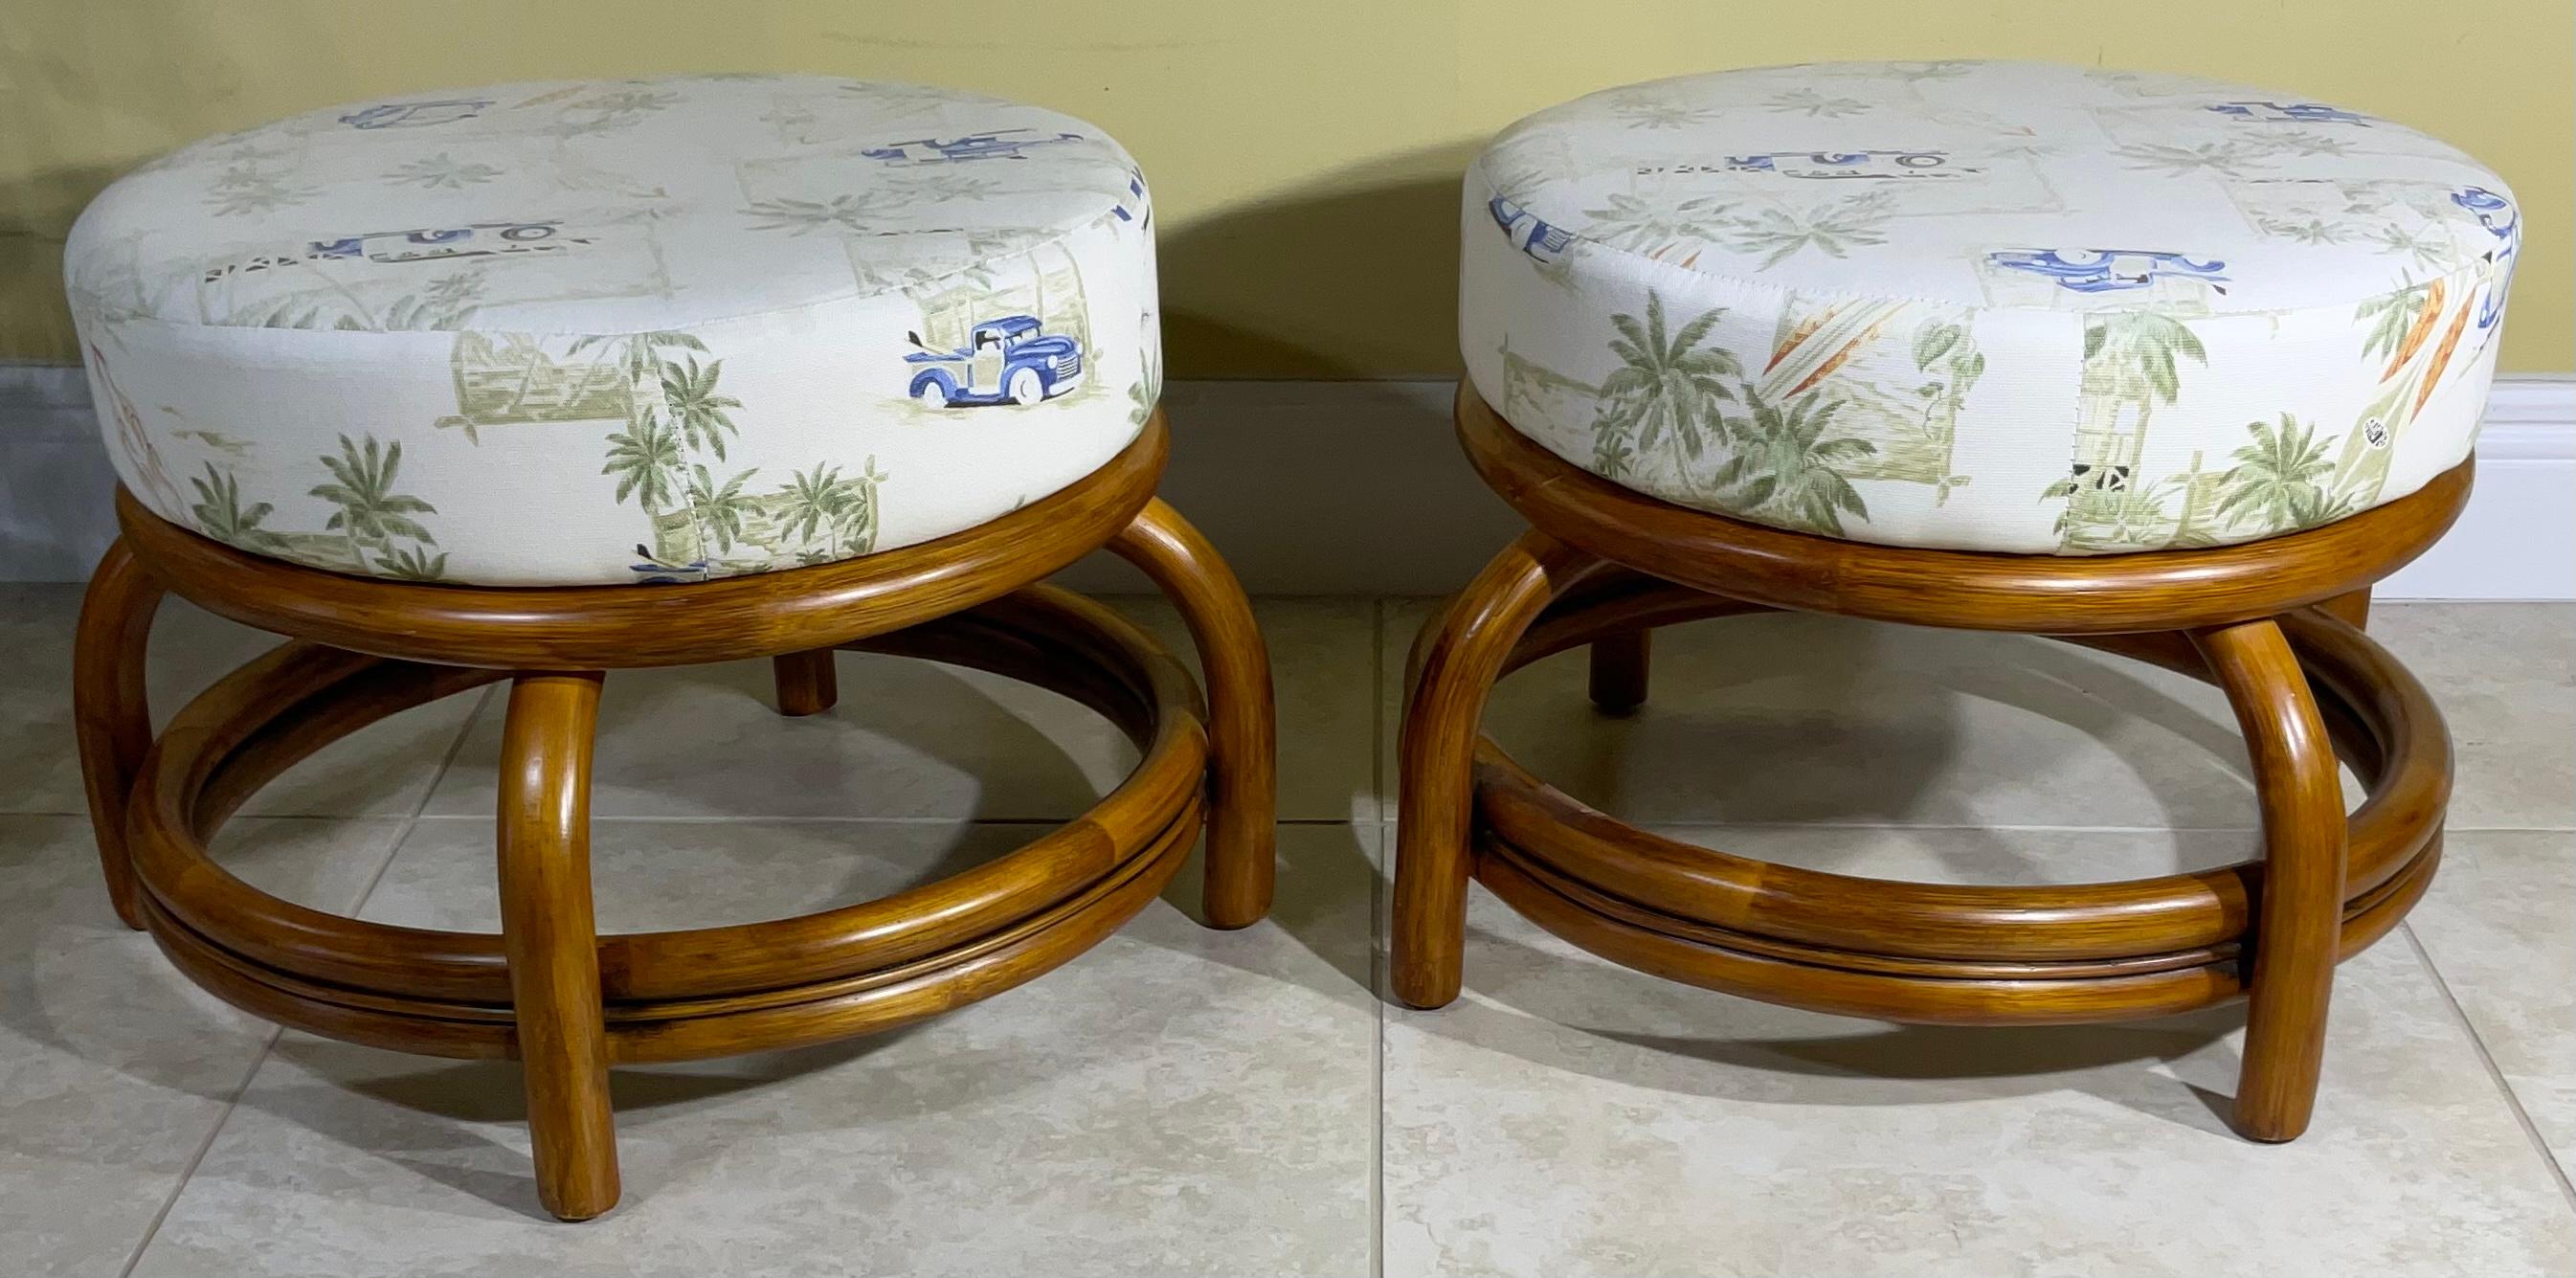 Pair of Midcentury Vintage Bamboo Sitting Stool In Good Condition For Sale In Delray Beach, FL